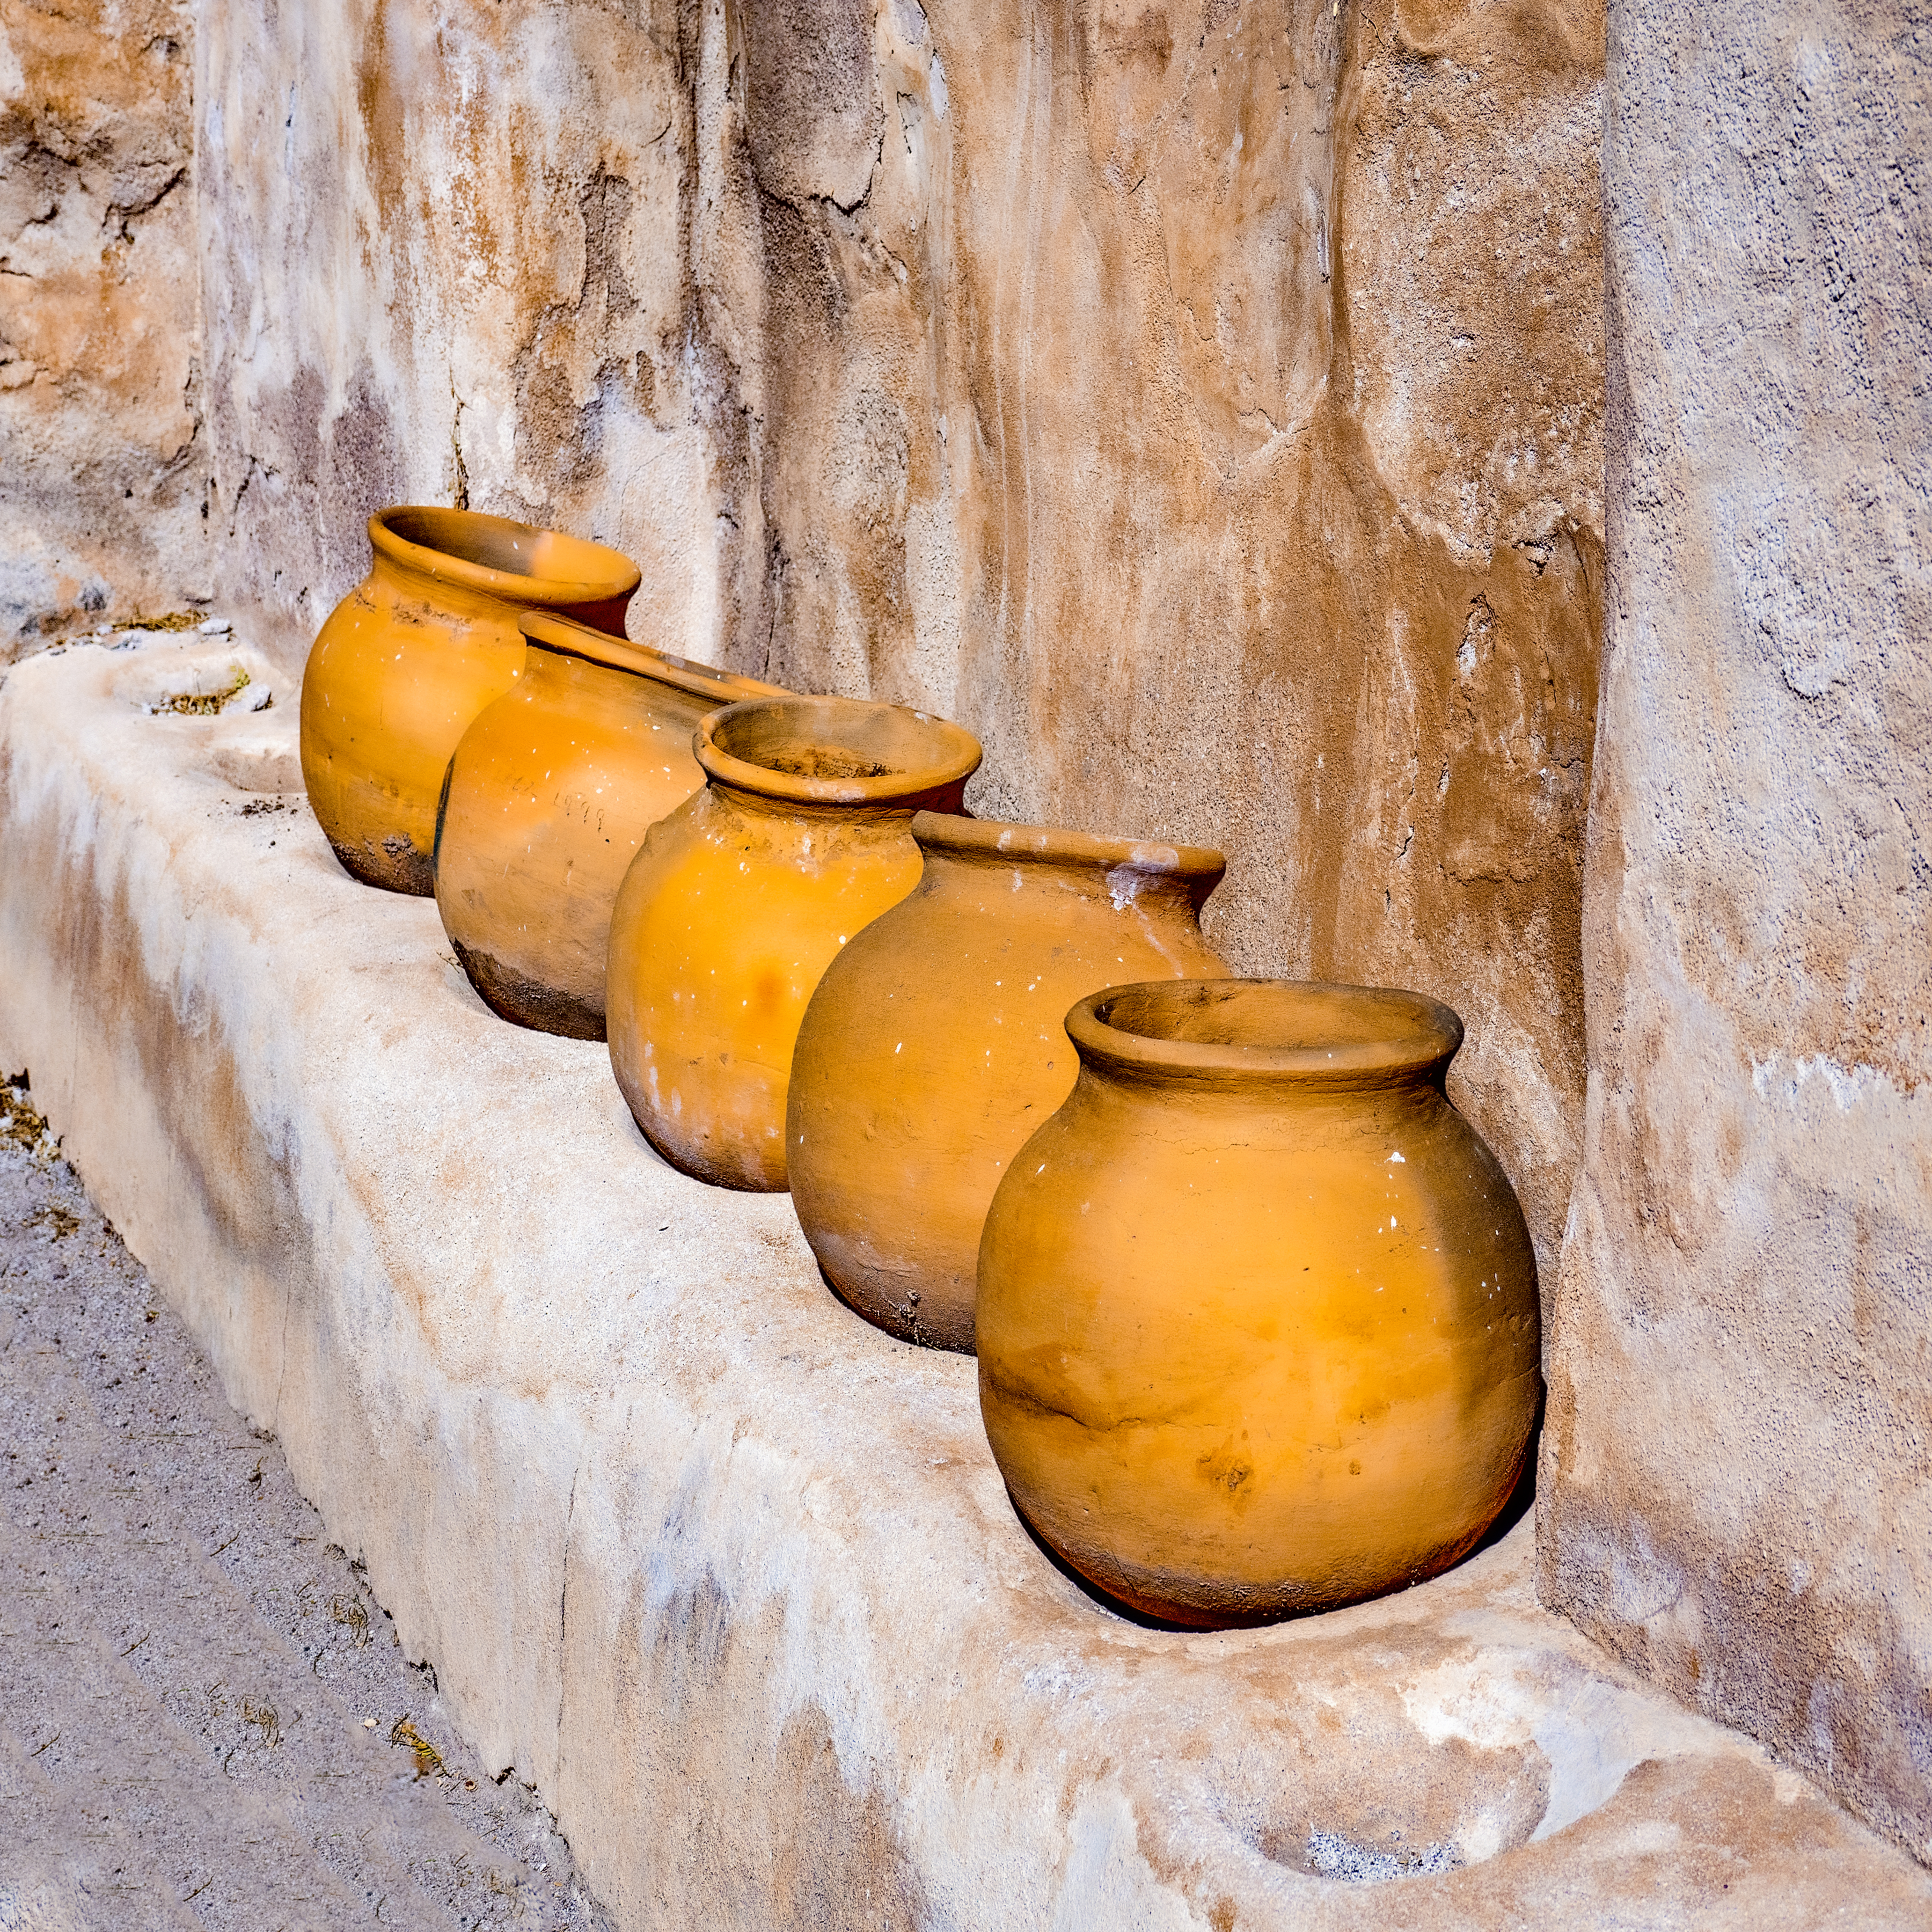 FIVE CLAY POTS - I came upon this row of clay pots in a back room of an old mission building south of Tucson. At the time, I lived in the mid-west, and a photo of clay pots in a old mission wasn't what people there were looking for. Now that I live in the southwest, it fits right in.